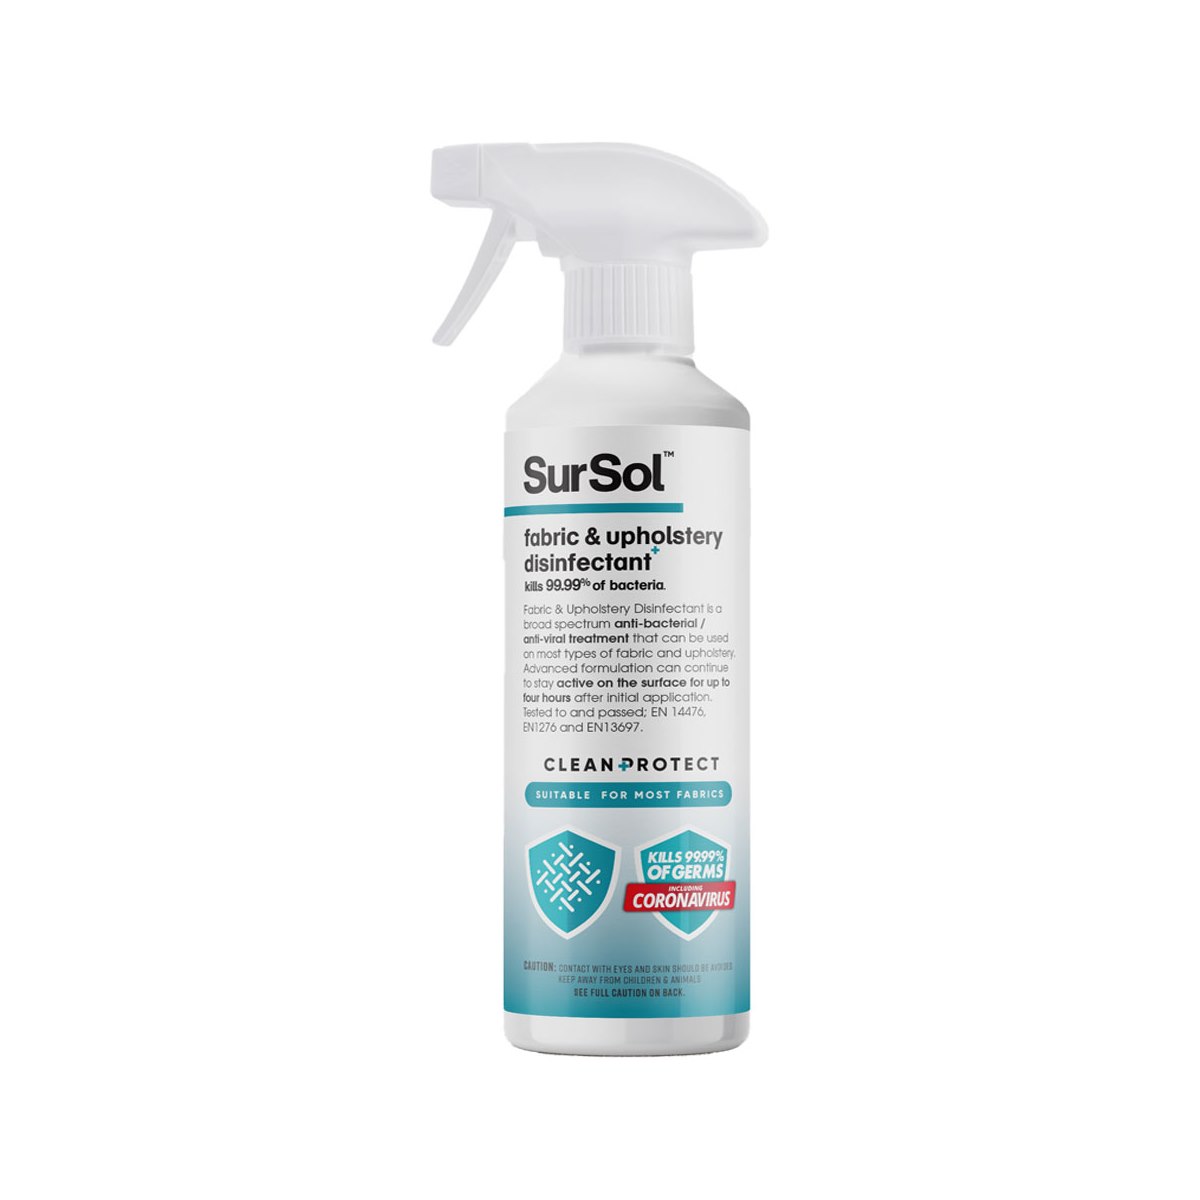 SurSol Fabric and Upholstery Disinfectant Spray 1 Litre